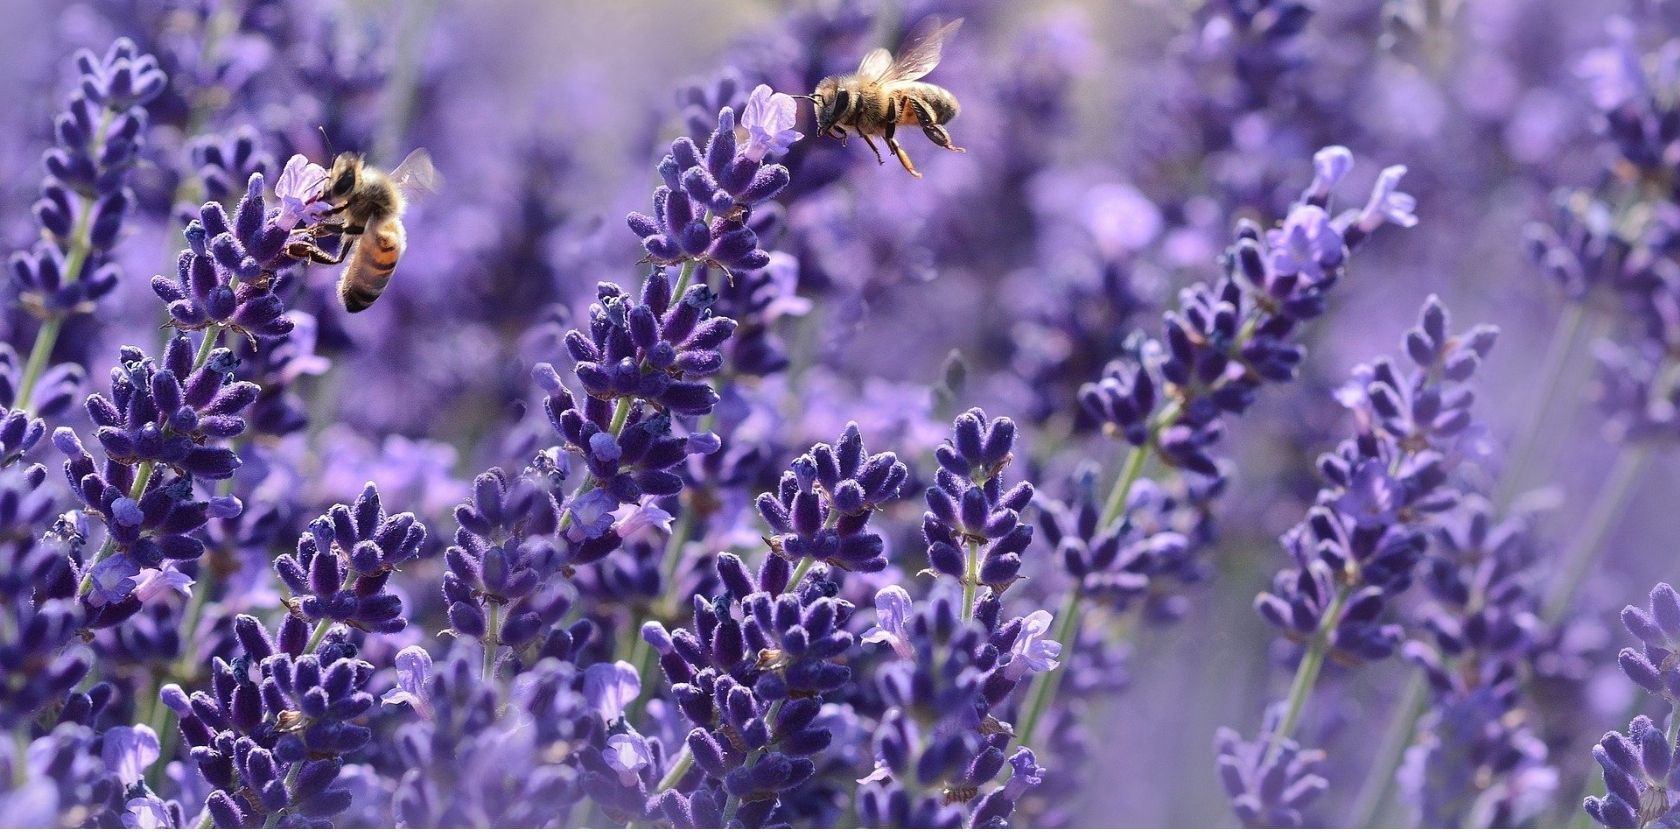 Image of lavenders with bees collecting pollen from them.